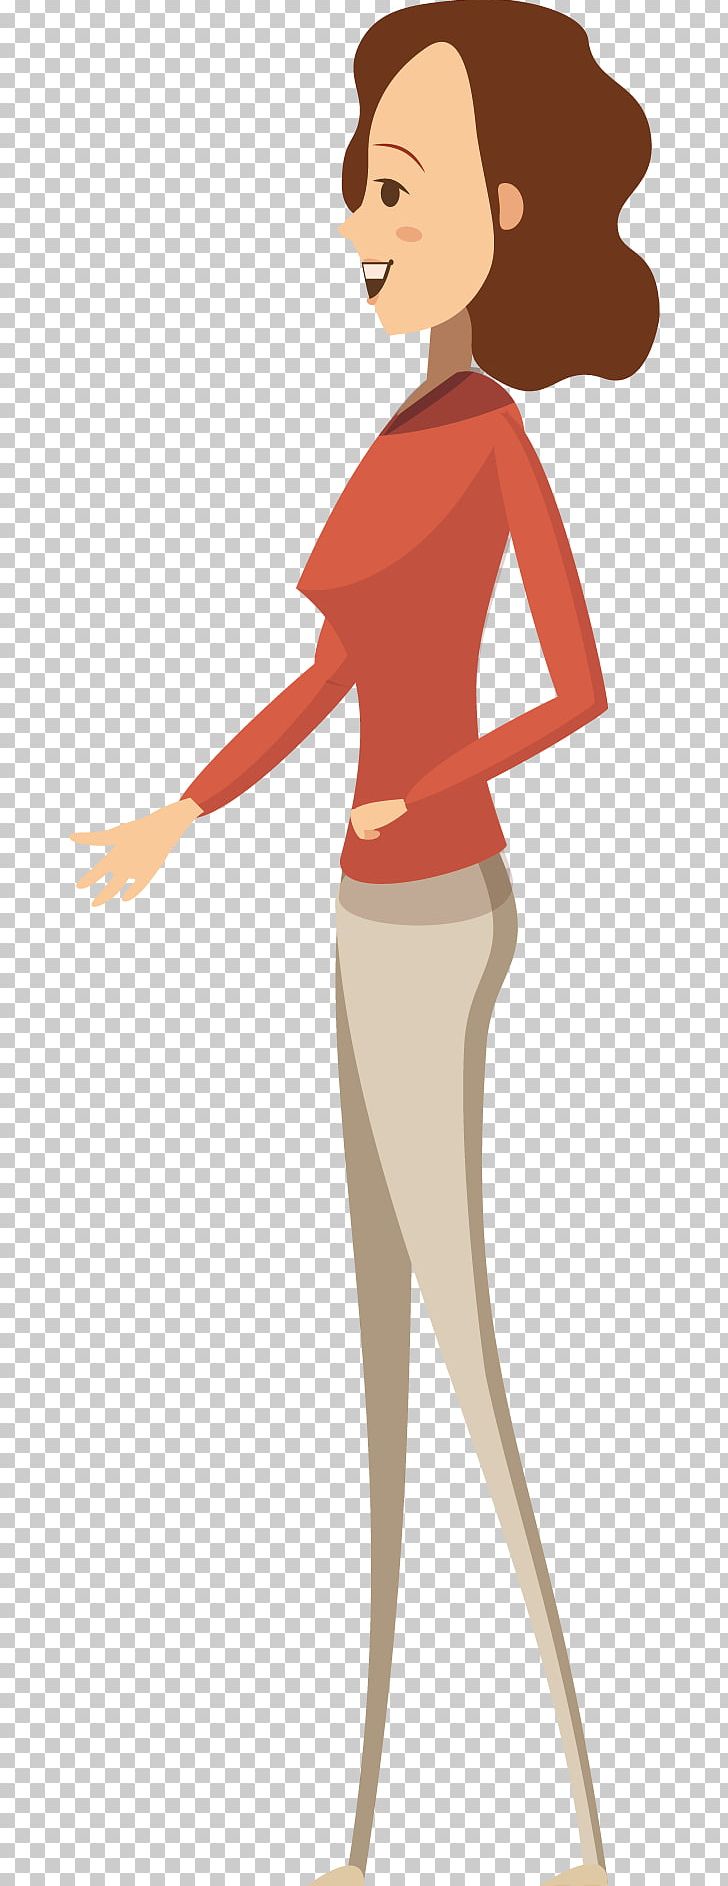 Woman Illustration PNG, Clipart, Arm, Business, Cartoon, Dialog Box, Fictional Character Free PNG Download